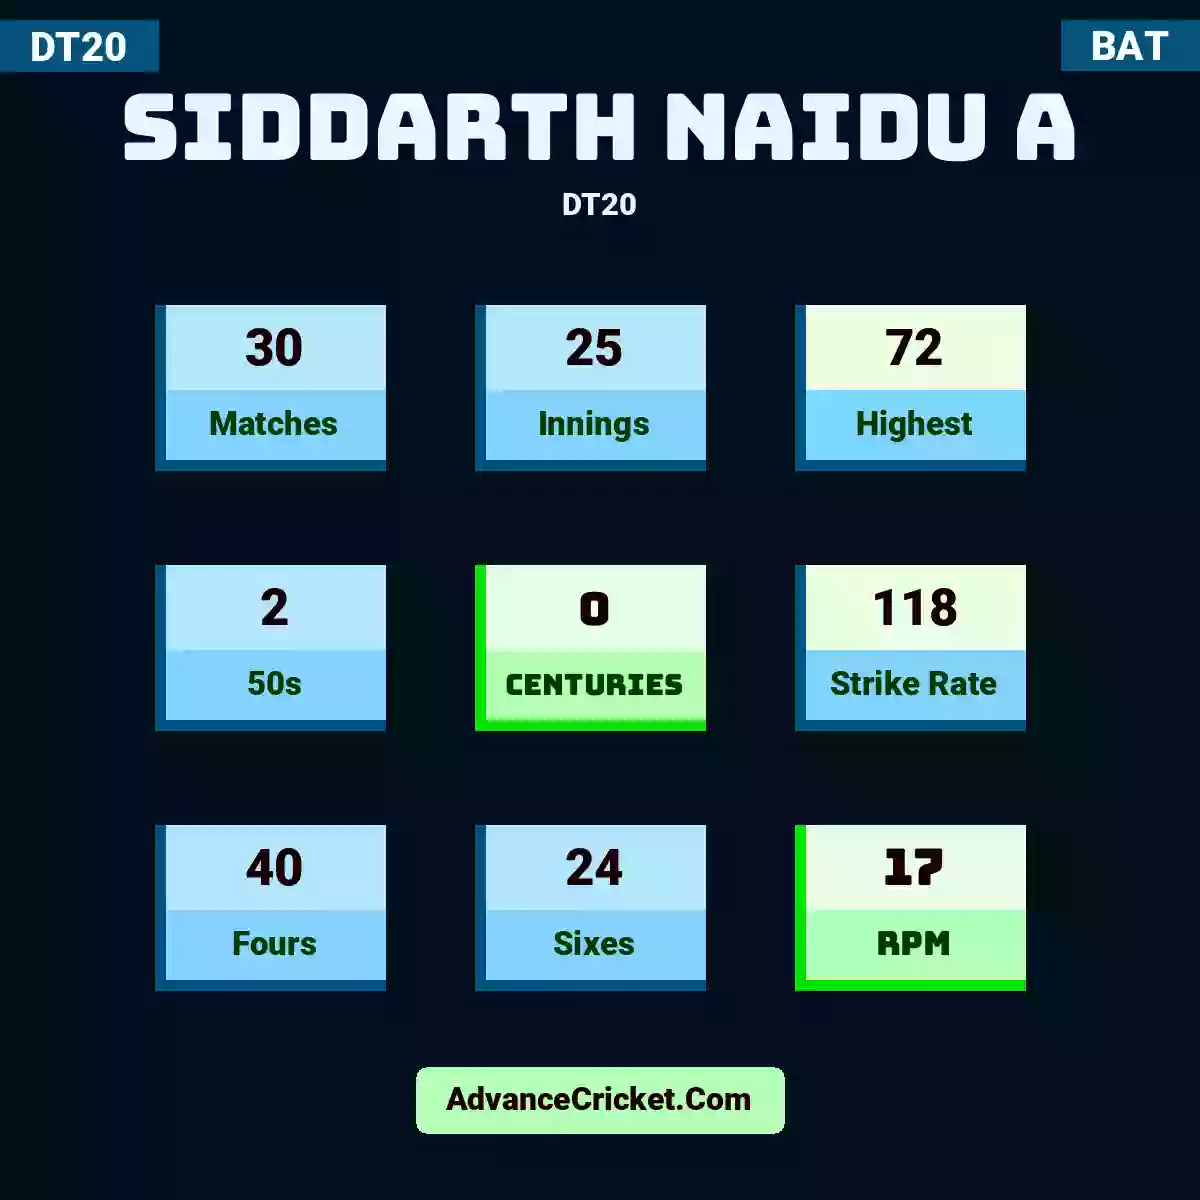 Siddarth Naidu A DT20 , Siddarth Naidu A played 30 matches, scored 72 runs as highest, 2 half-centuries, and 0 centuries, with a strike rate of 118. S.Naidu.A hit 40 fours and 24 sixes, with an RPM of 17.